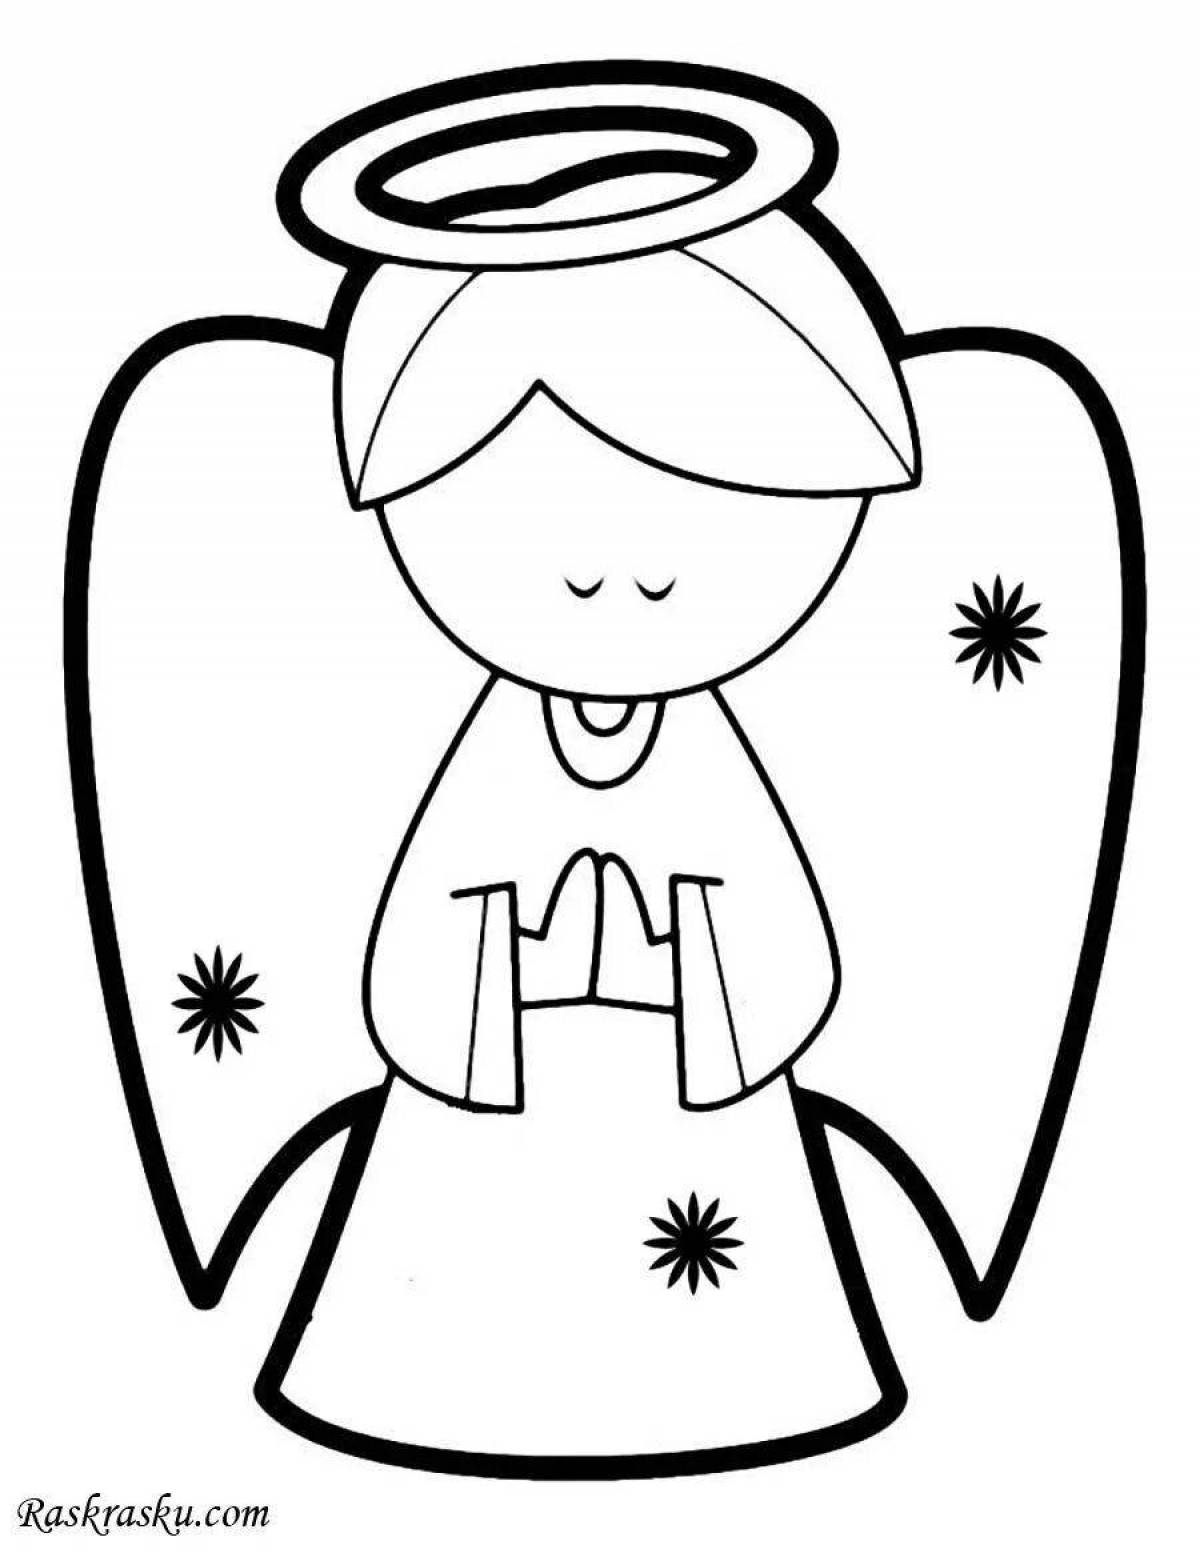 Coloring angel with heavenly power for children